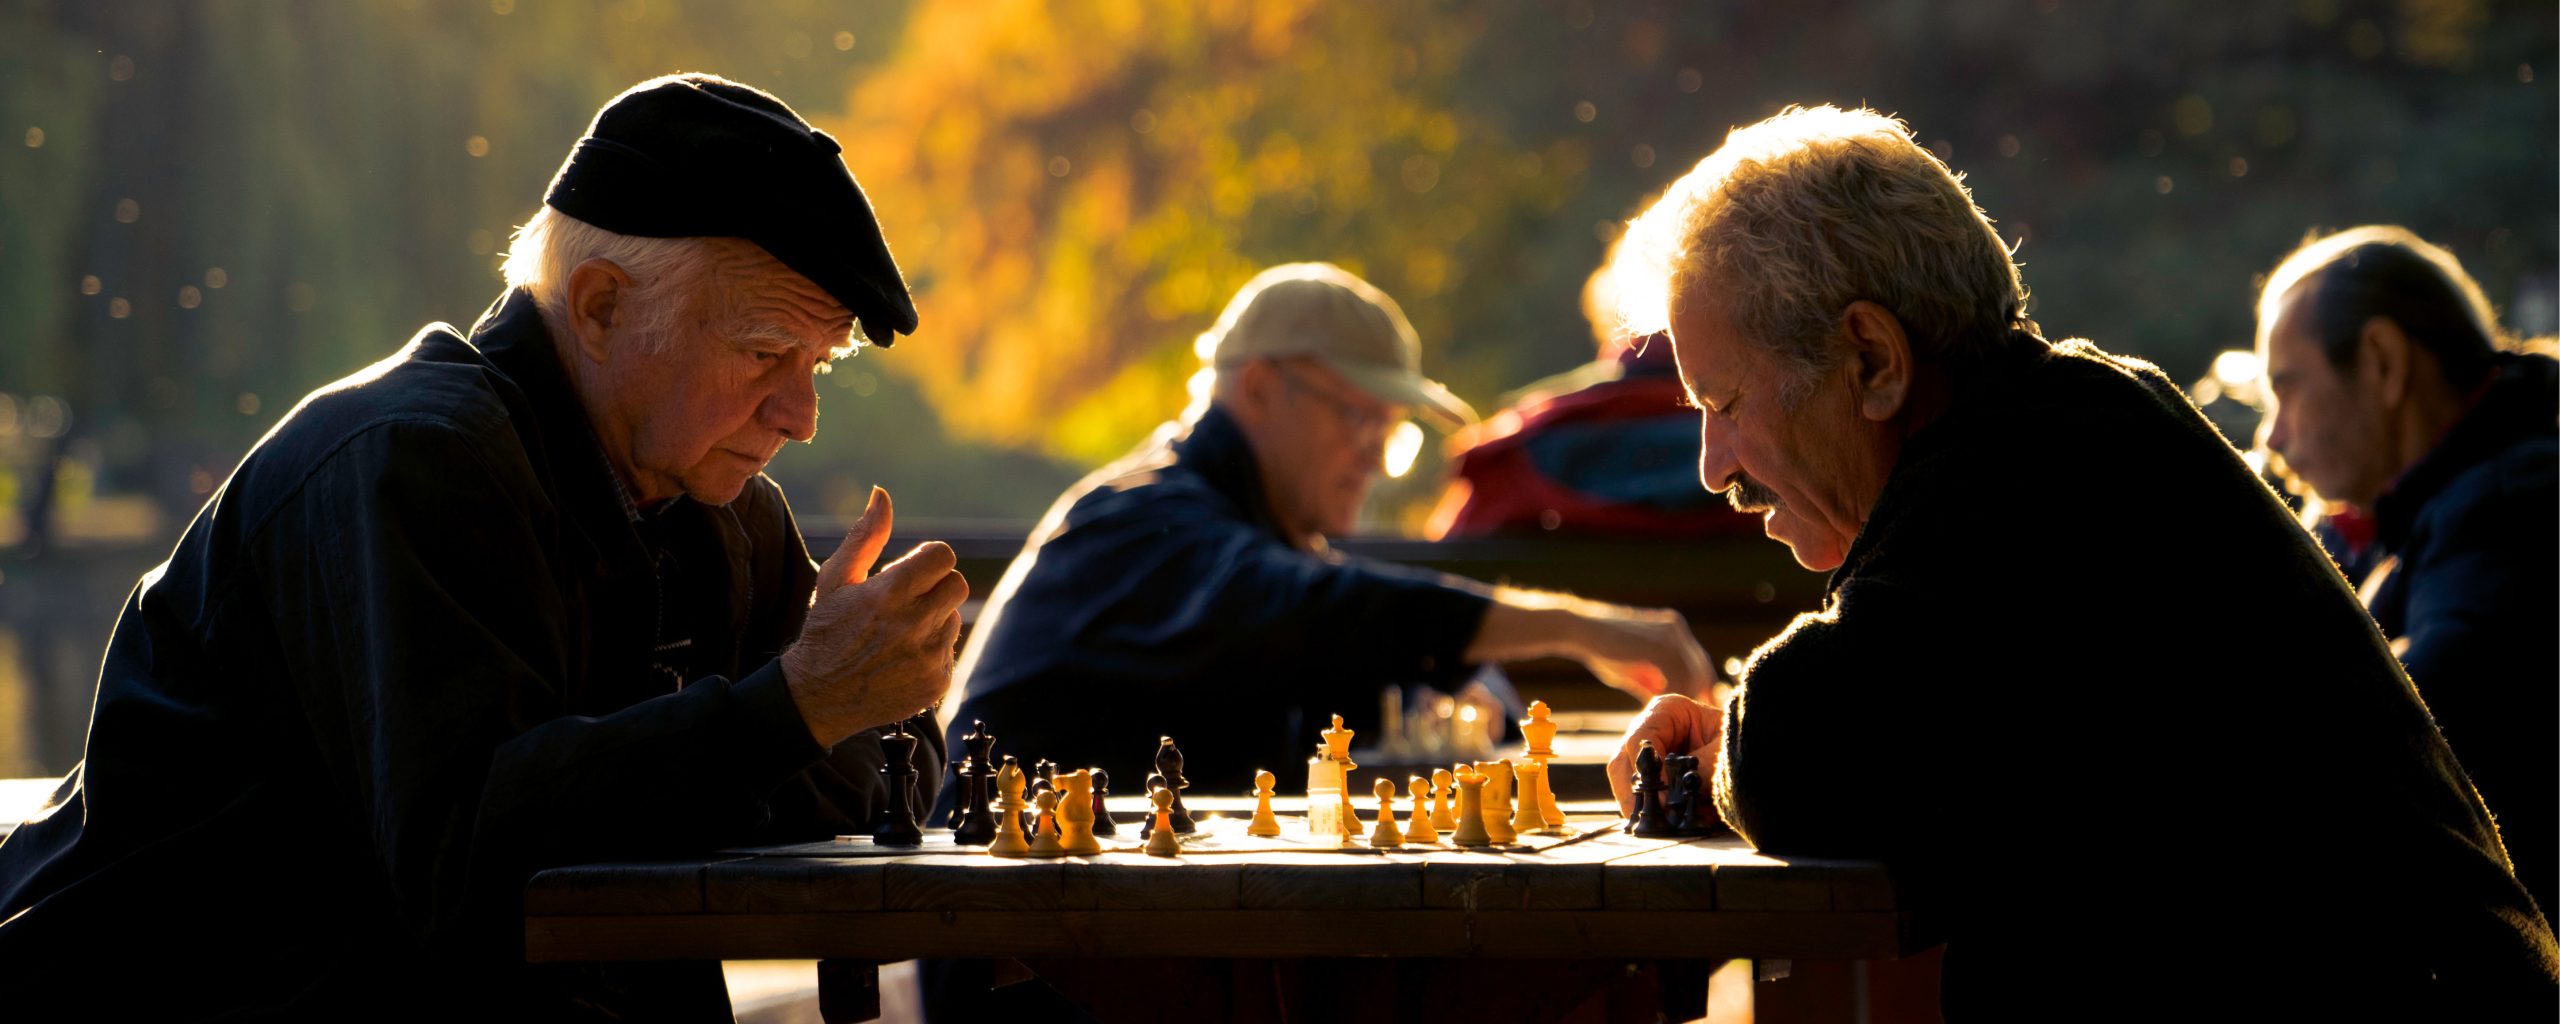 Elderly Couple Playing Chess